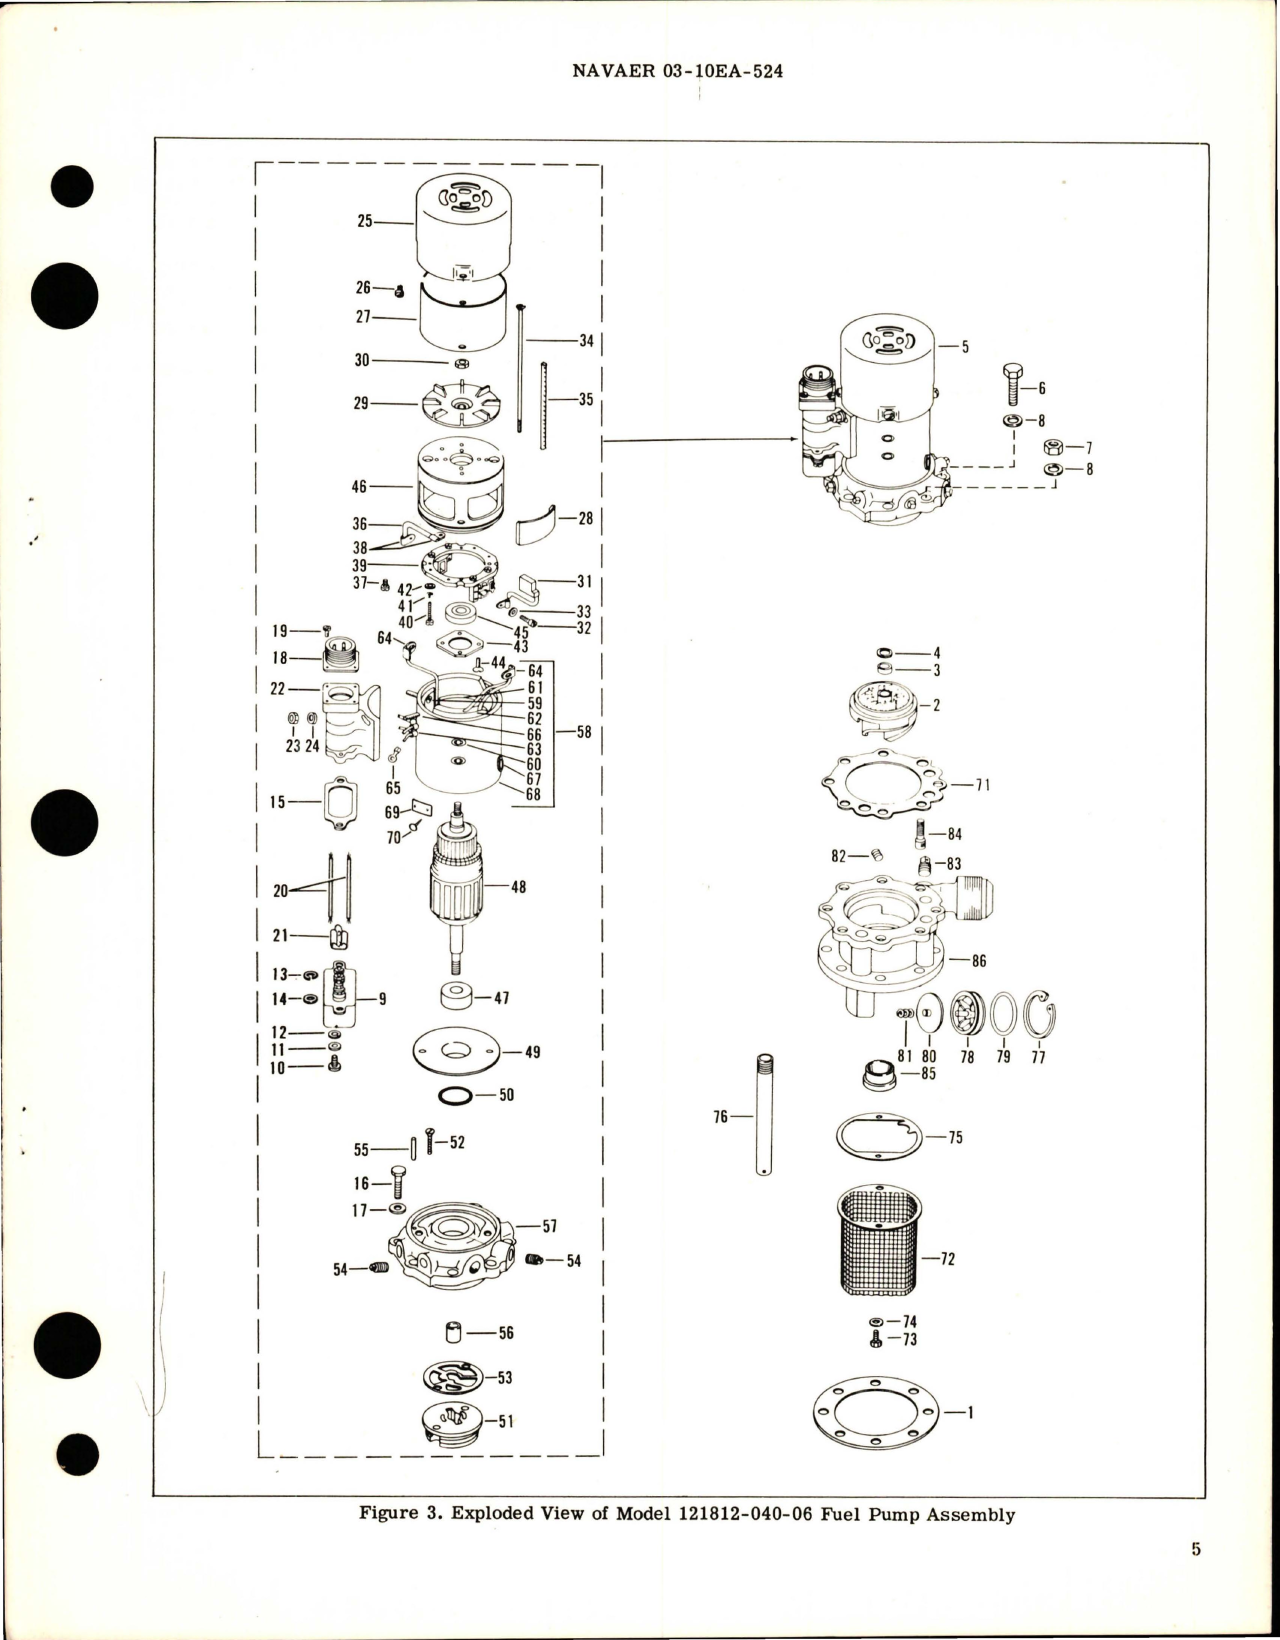 Sample page 5 from AirCorps Library document: Overhaul Instructions with Parts Breakdown for Fuel Pump Assembly - Part 121812-040-06